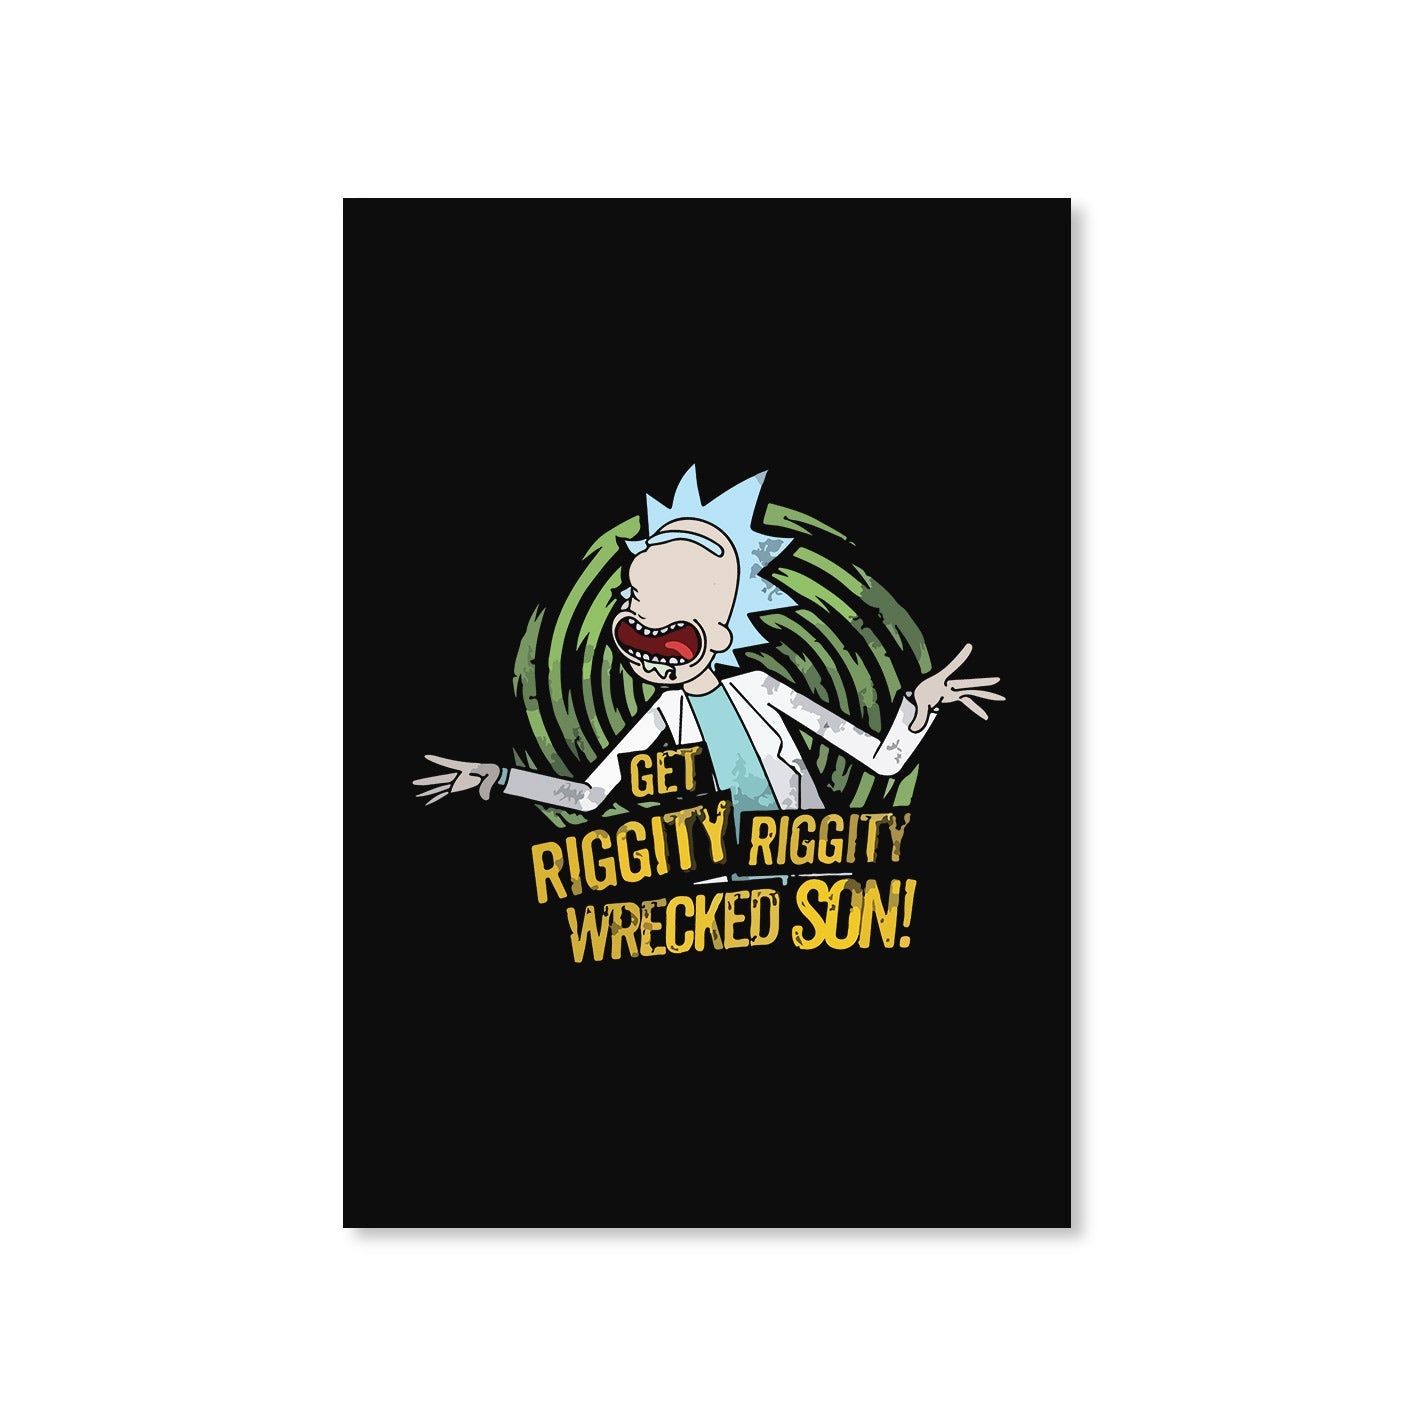 rick and morty riggity poster wall art buy online india the banyan tee tbt a4 rick and morty online summer beth mr meeseeks jerry quote vector art clothing accessories merchandise